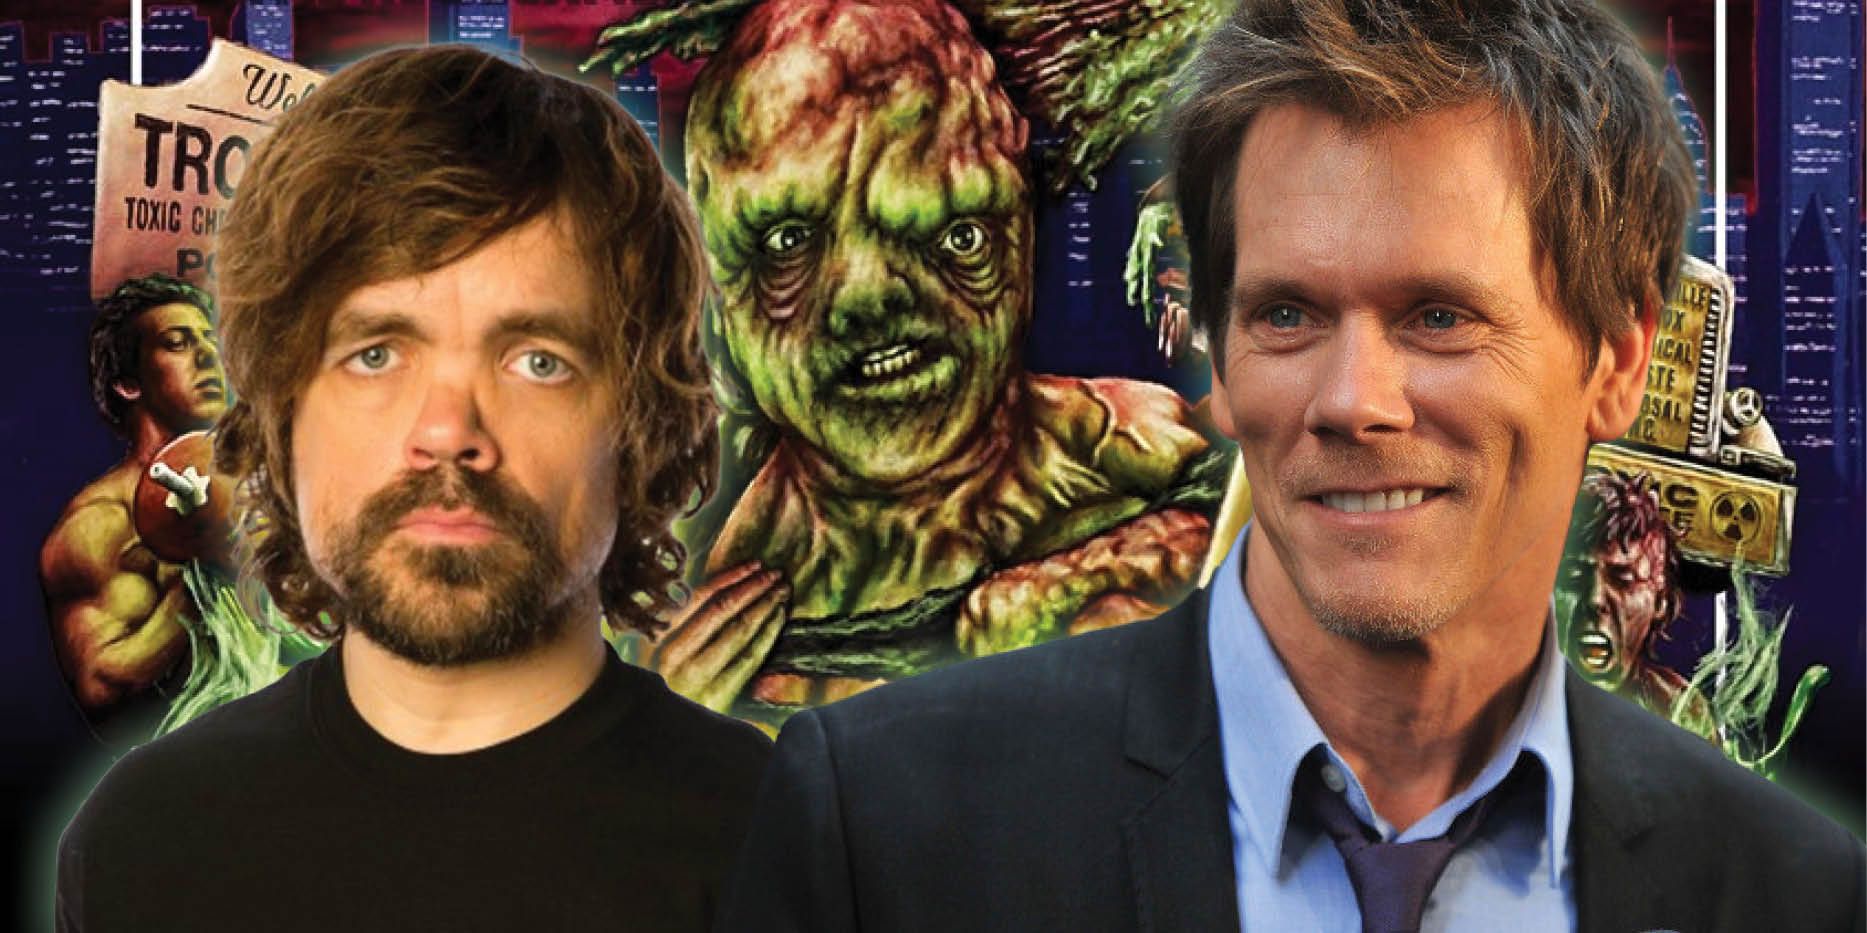 Kevin Bacon &amp; Peter Dinklage in The Toxic Avenger